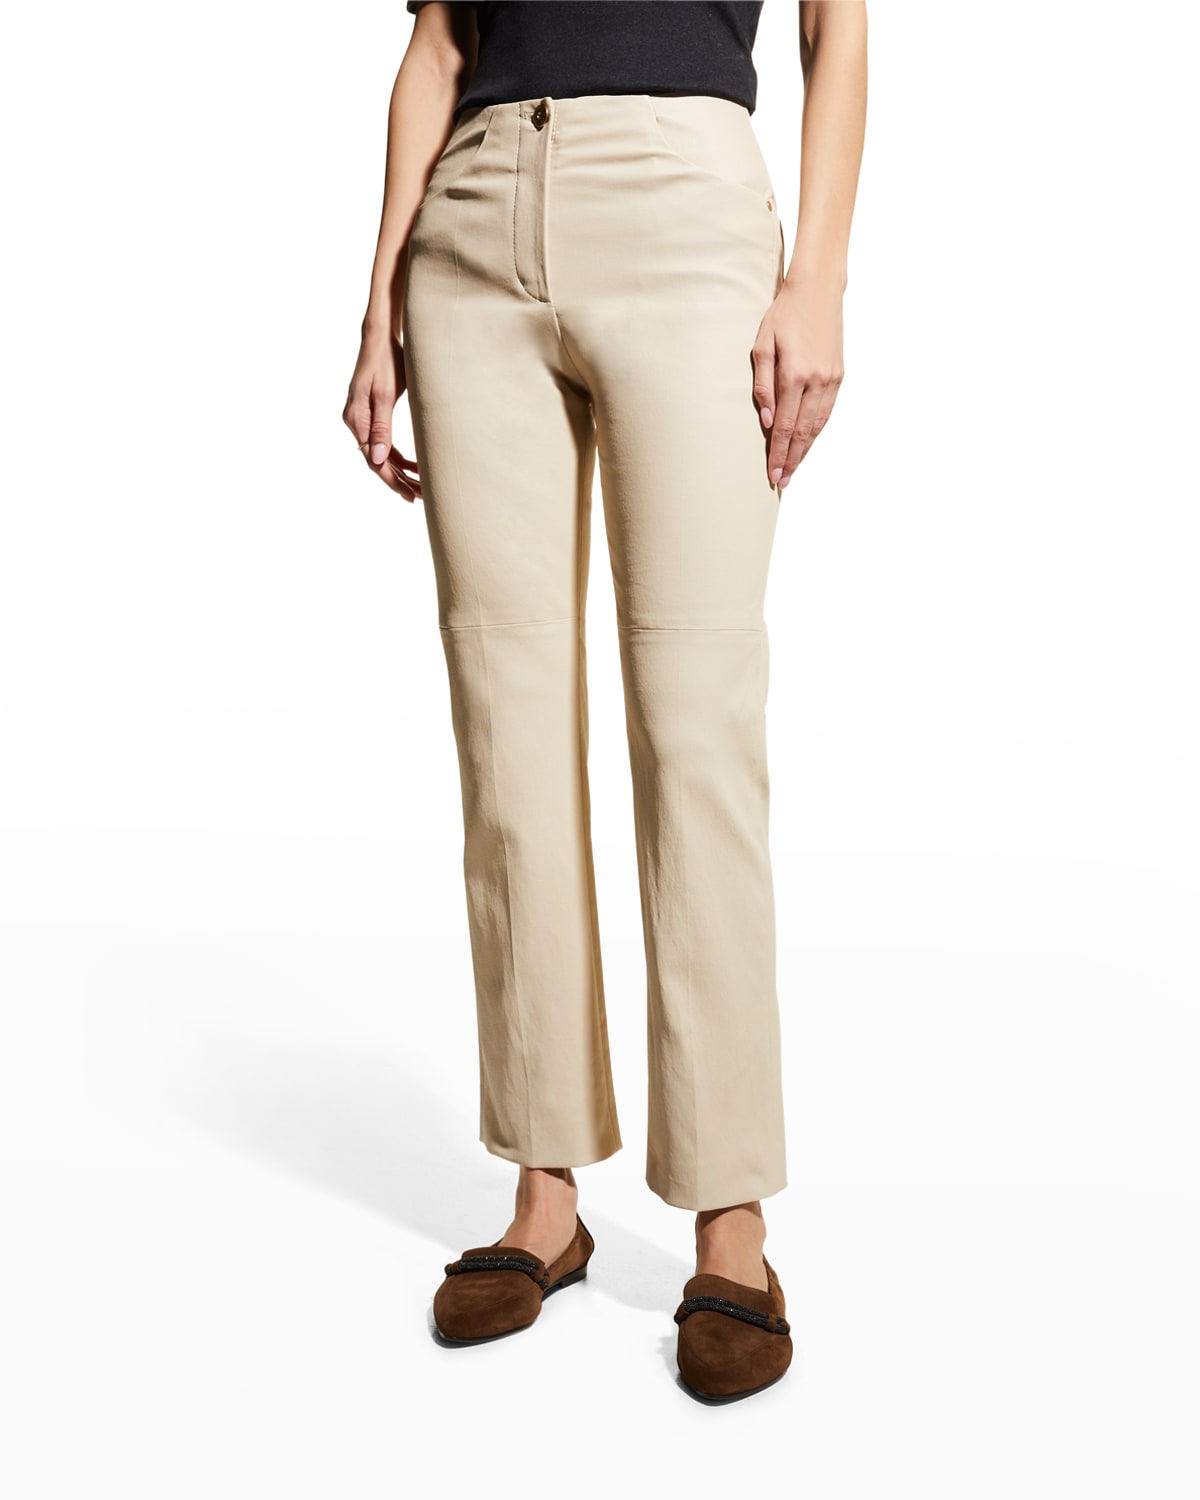 New York Womens Girls Stylish Light Beige Suede Leather Pant 